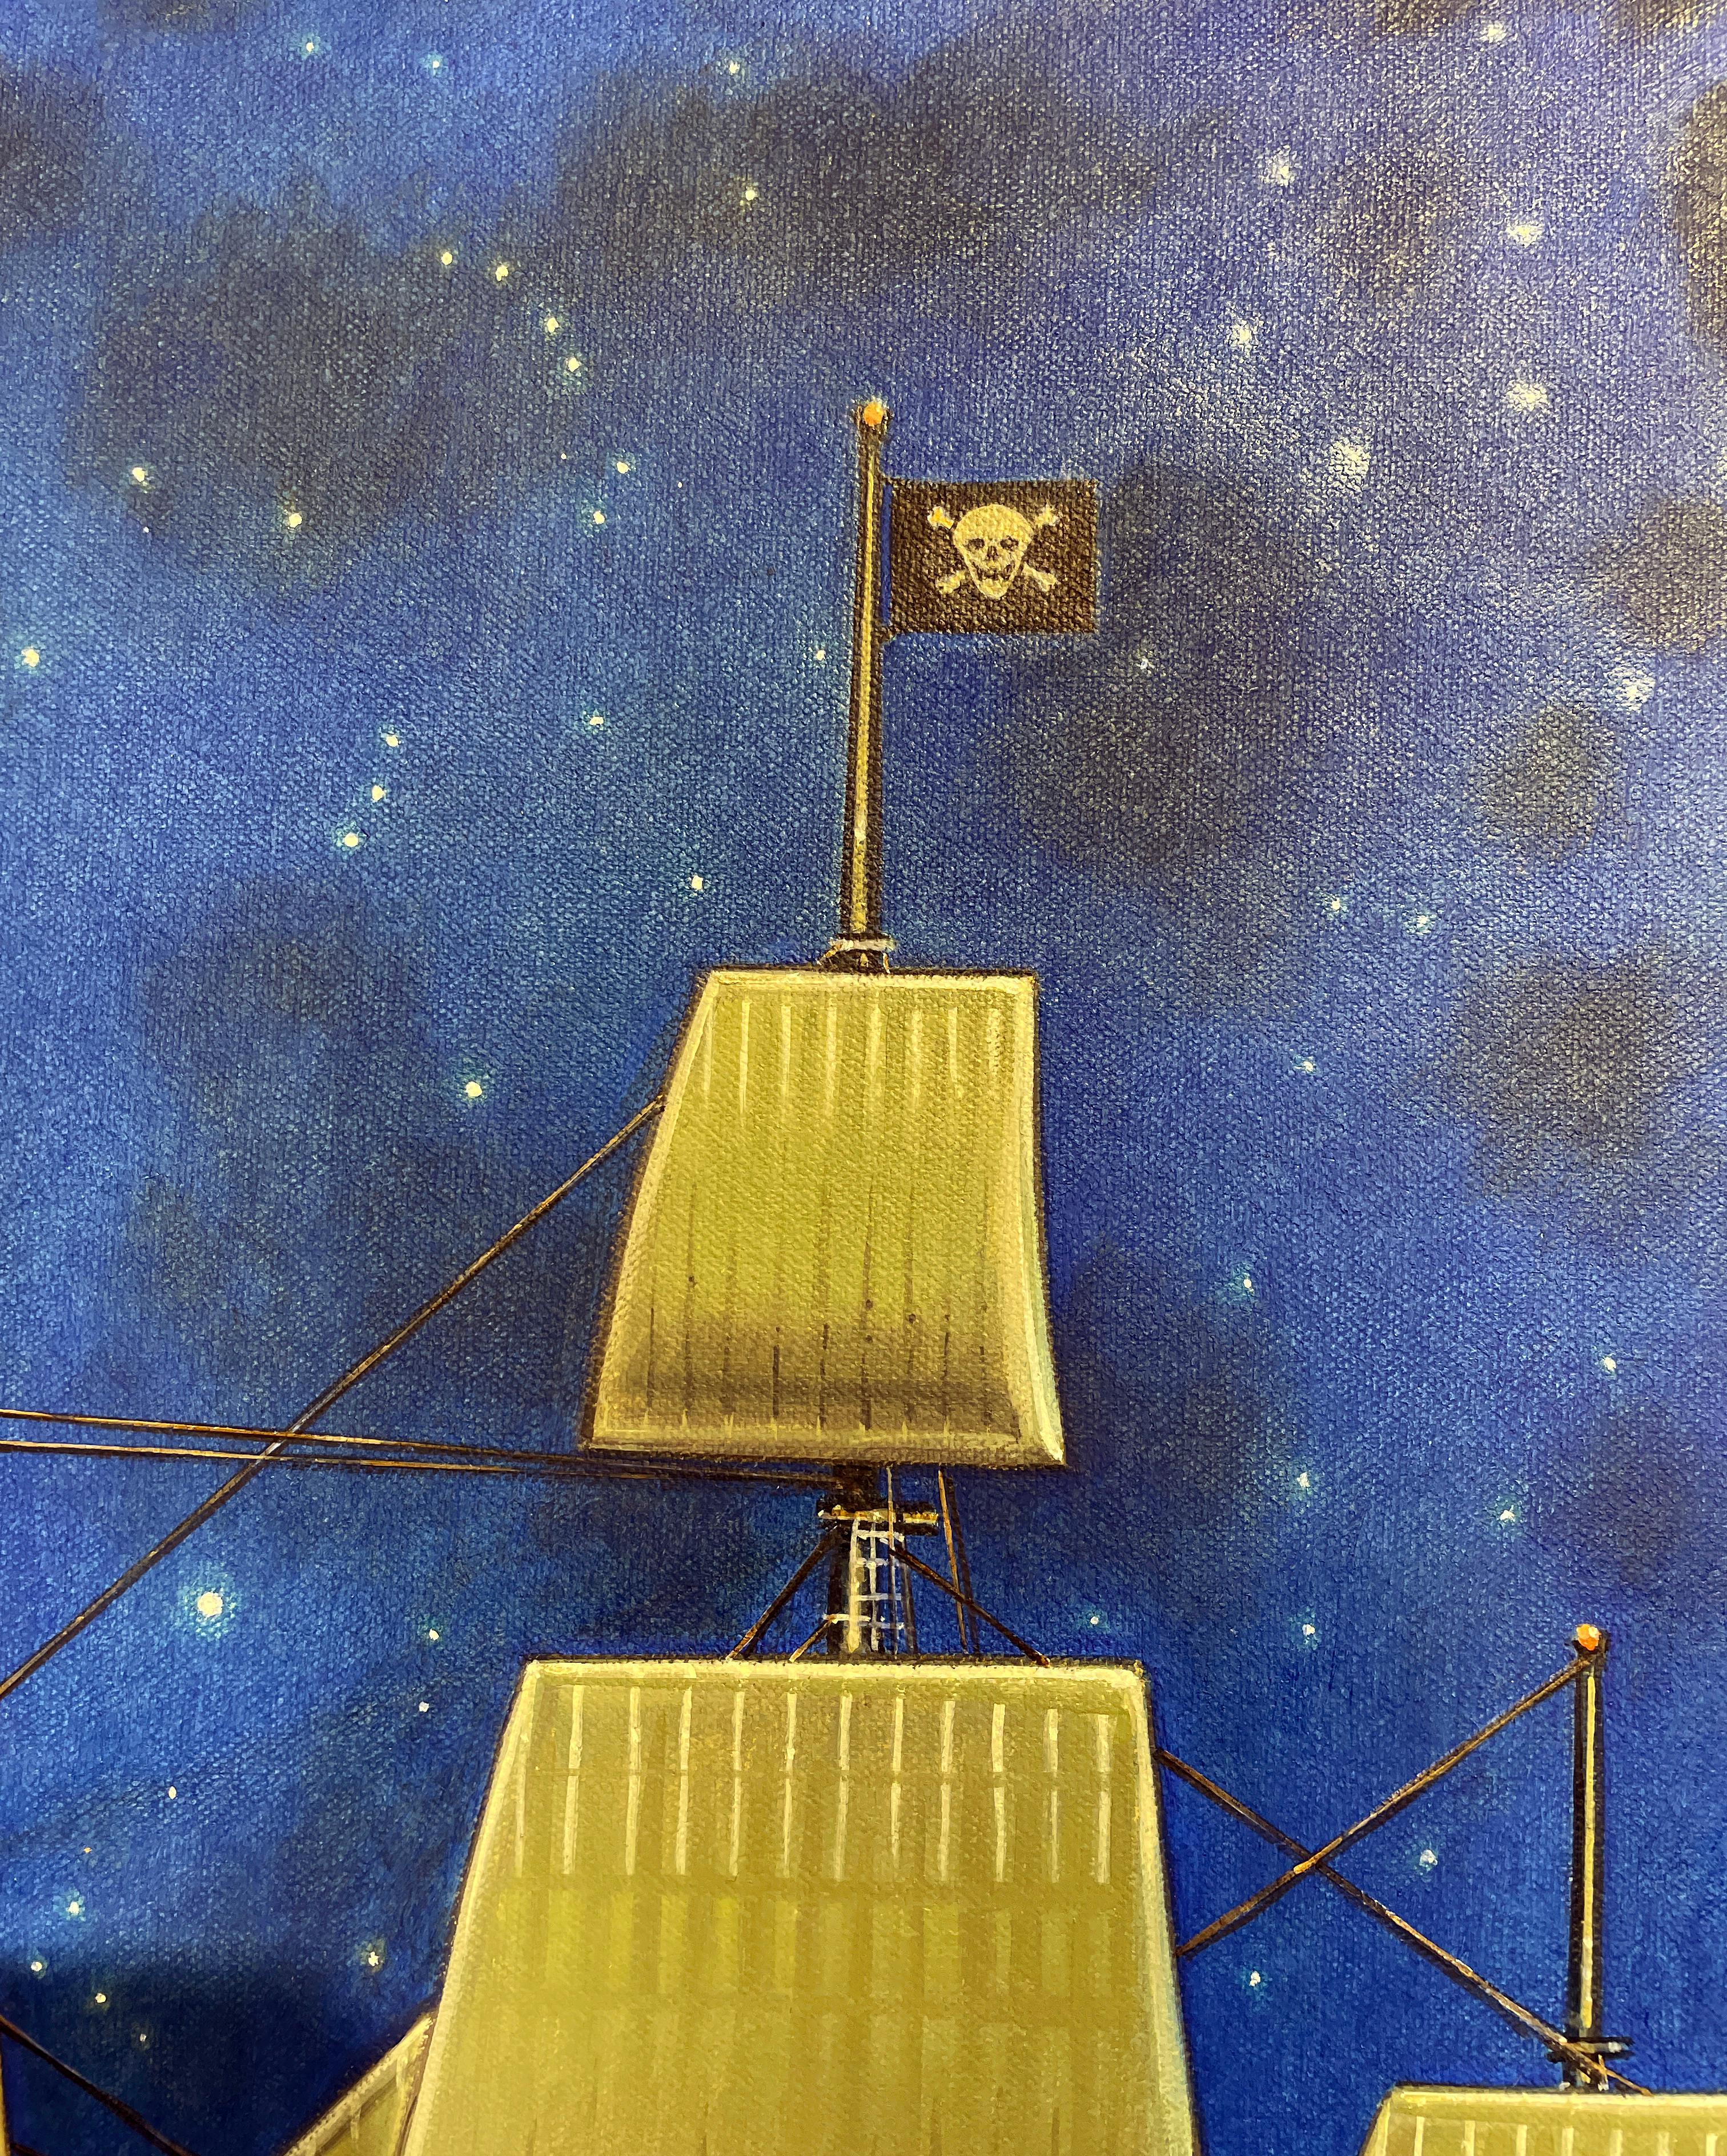 Night Crossing -  Model Pirate Ship and Constellations, Oil on Panel - Surrealist Painting by John Hrehov